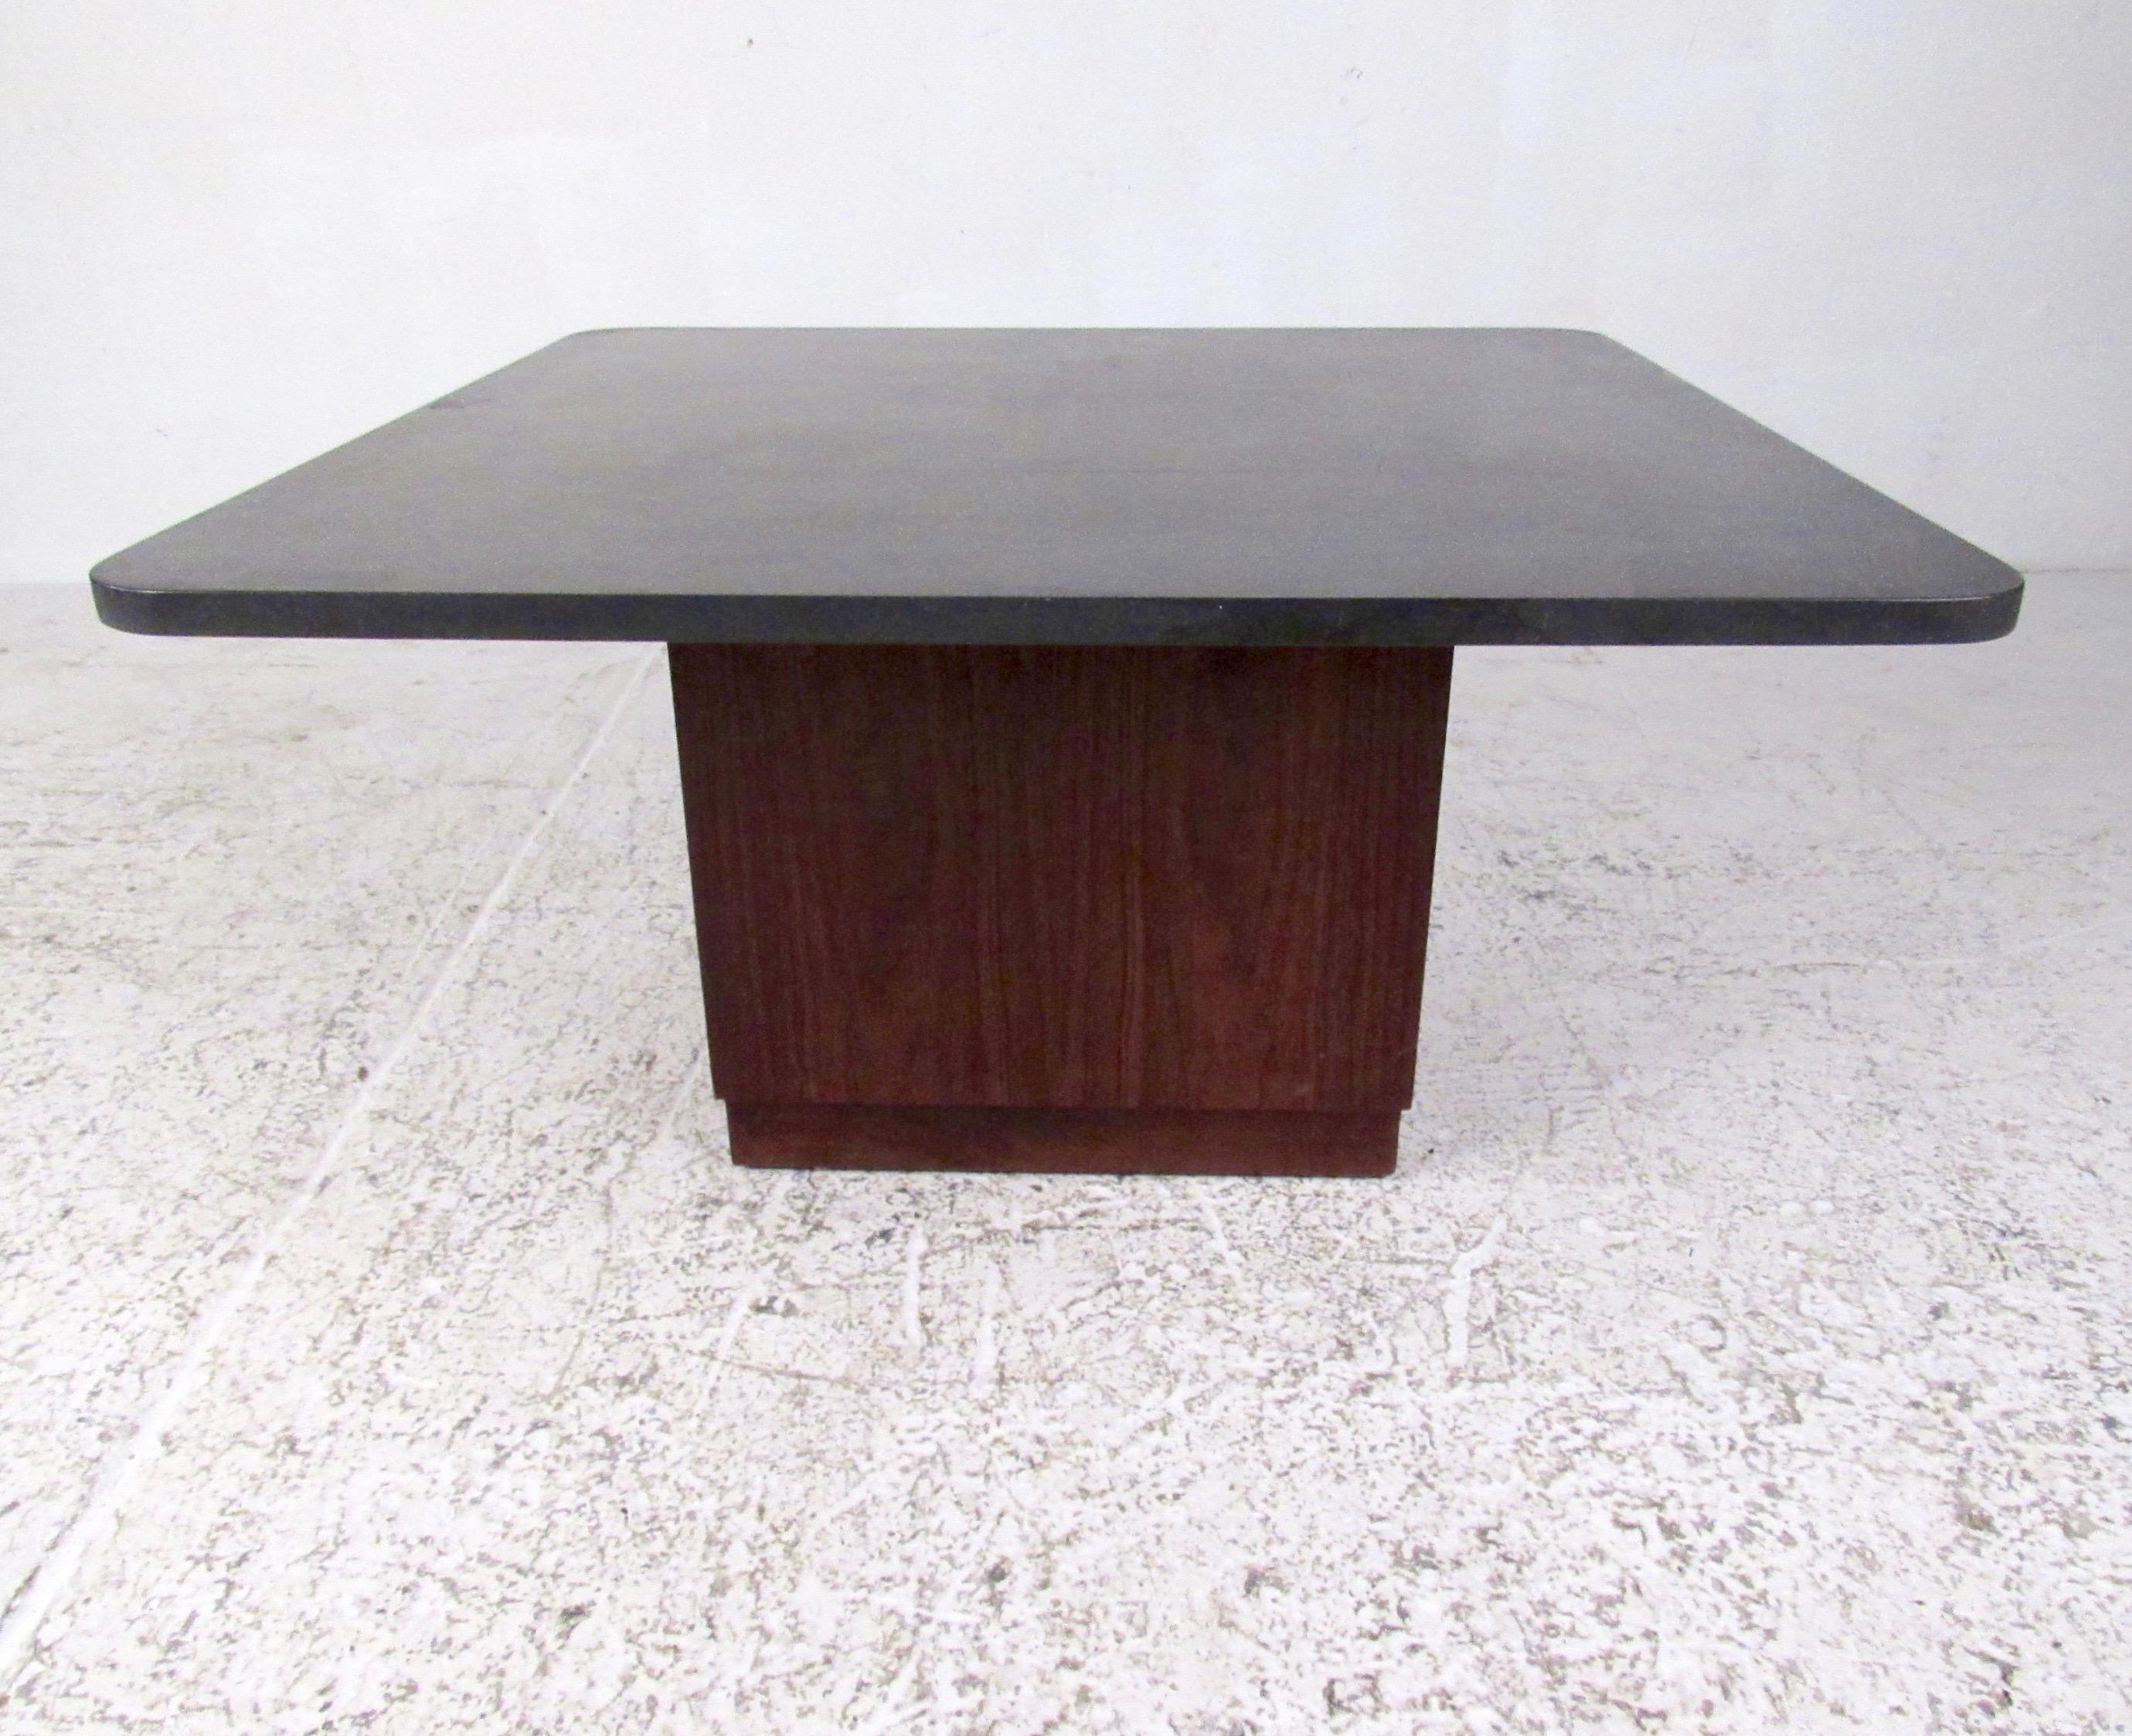 This stylish midcentury coffee table features vintage walnut base, square stone top, and unique Pearsall style design. At 32 by 32 inches this impressive 1960s table works as an end table or centre coffee table depending on the seating arrangement.